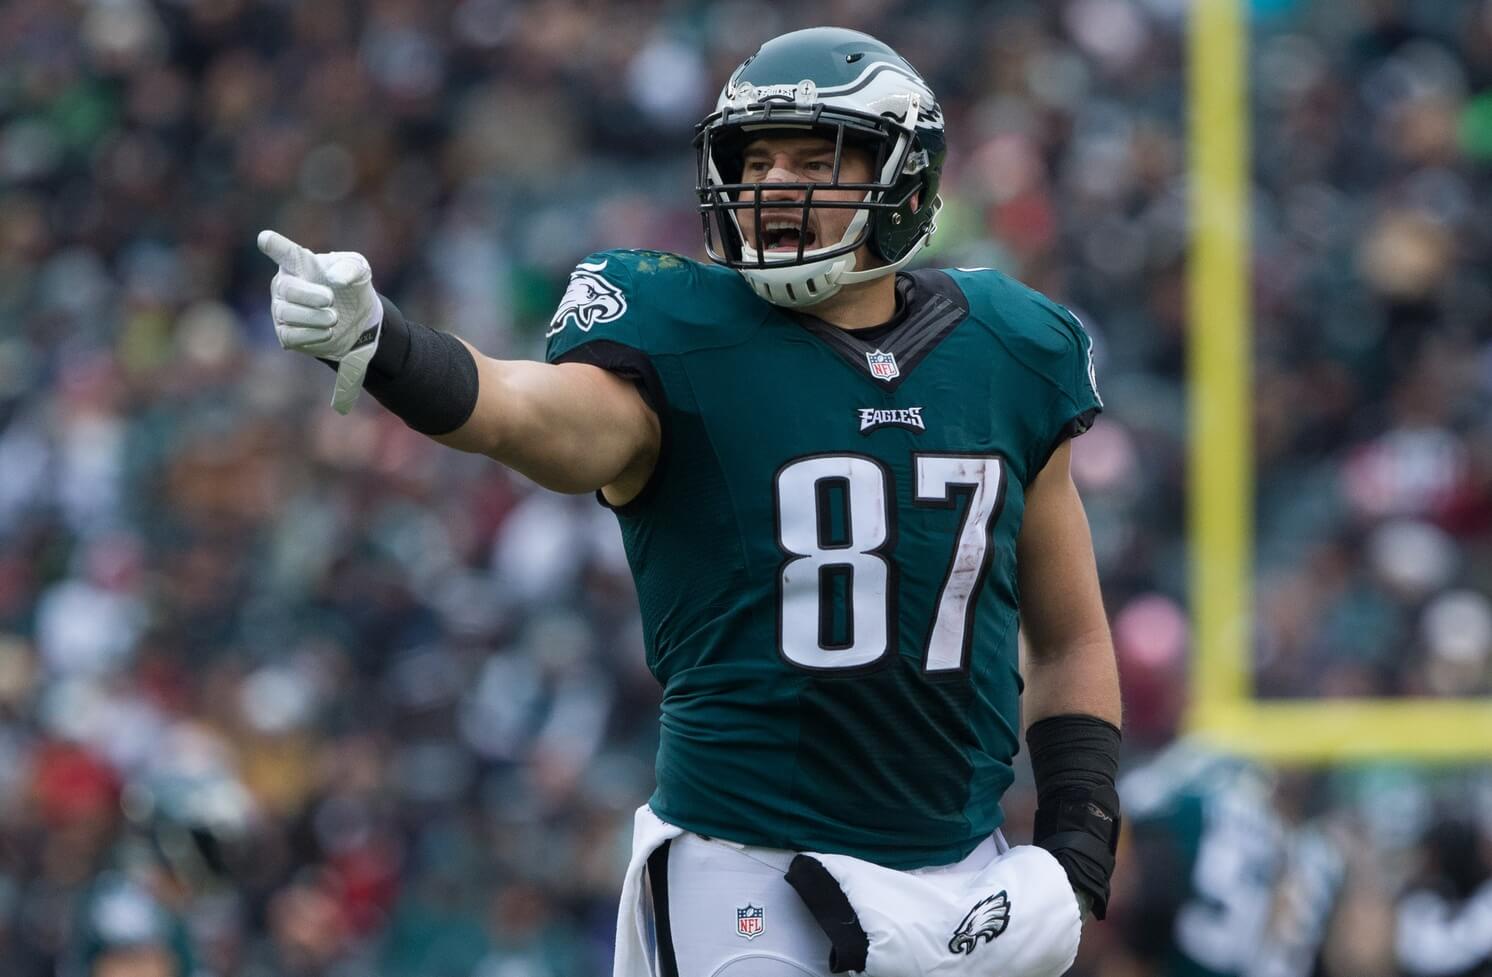 Eagles Film Room: Brent Celek will have a crucial role to play